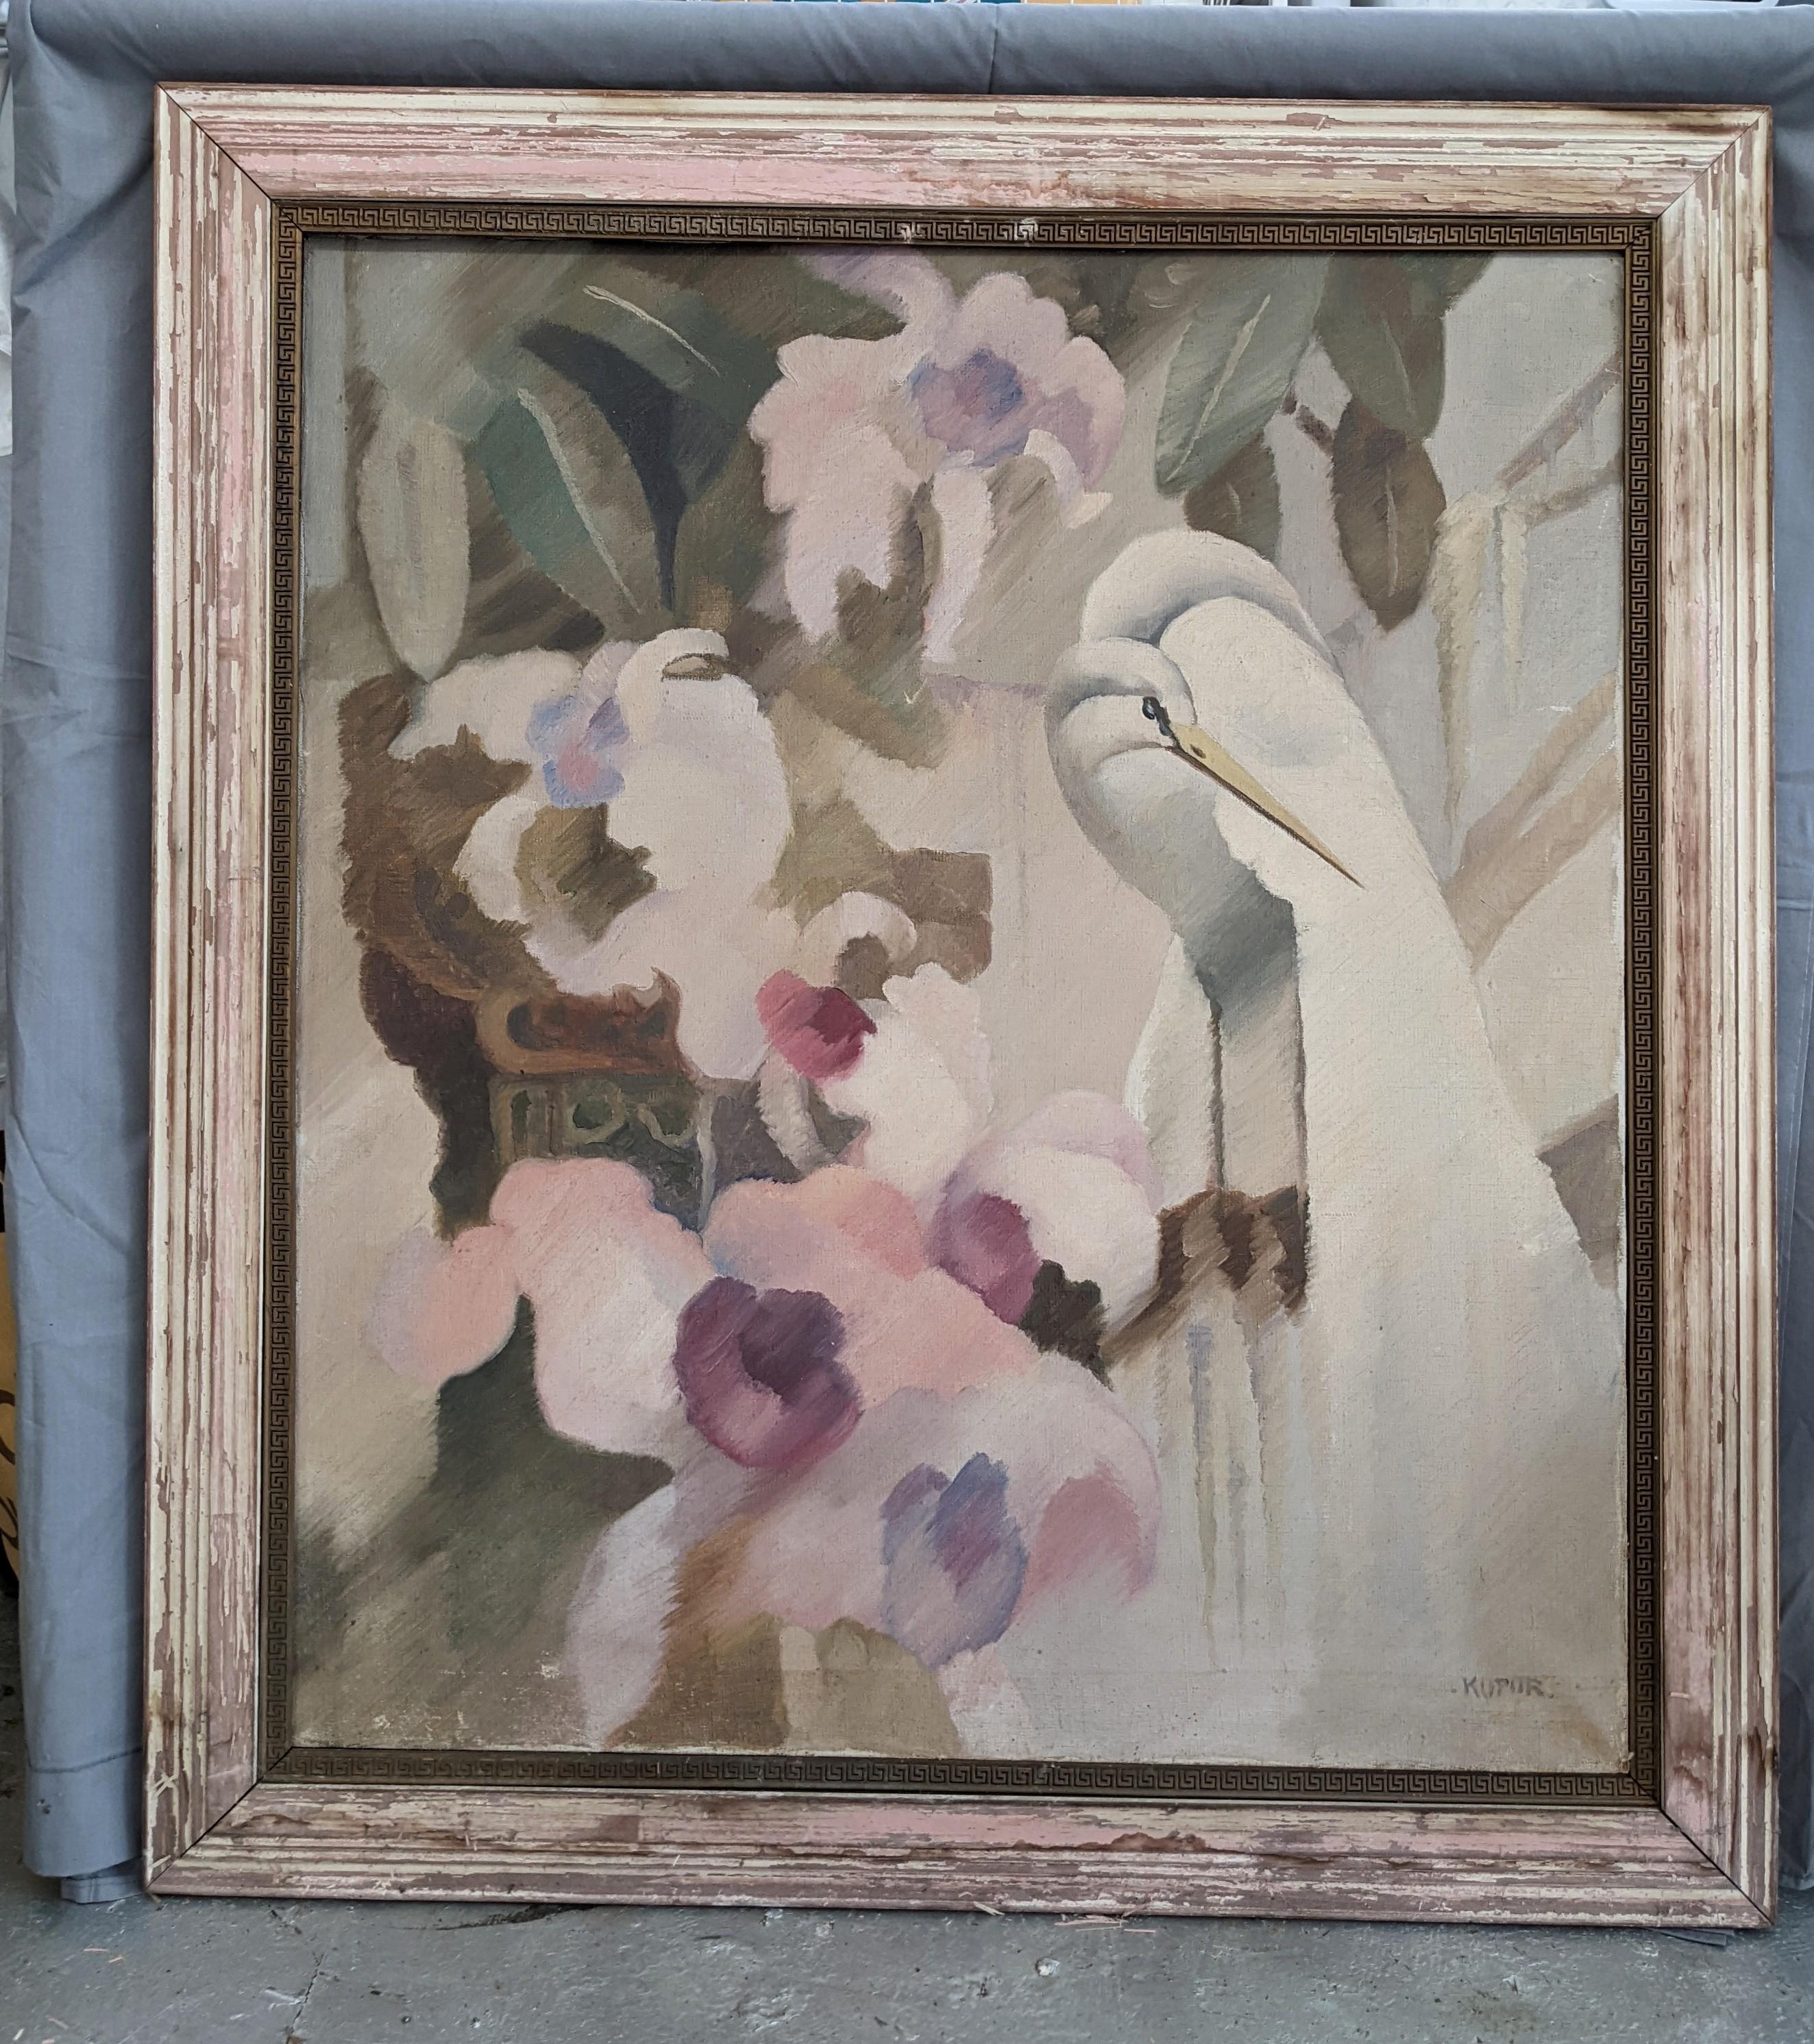 Large Rare Vintage 1940’s Artist Ruben Kupur Oil painting of Art Deco Tropical scene with herons within a scene of lush tropical orchids. 
Ruben Kupur was born In the Russian Federation In 1887 and set up an art studio in Chicago, Illinois in 1923.